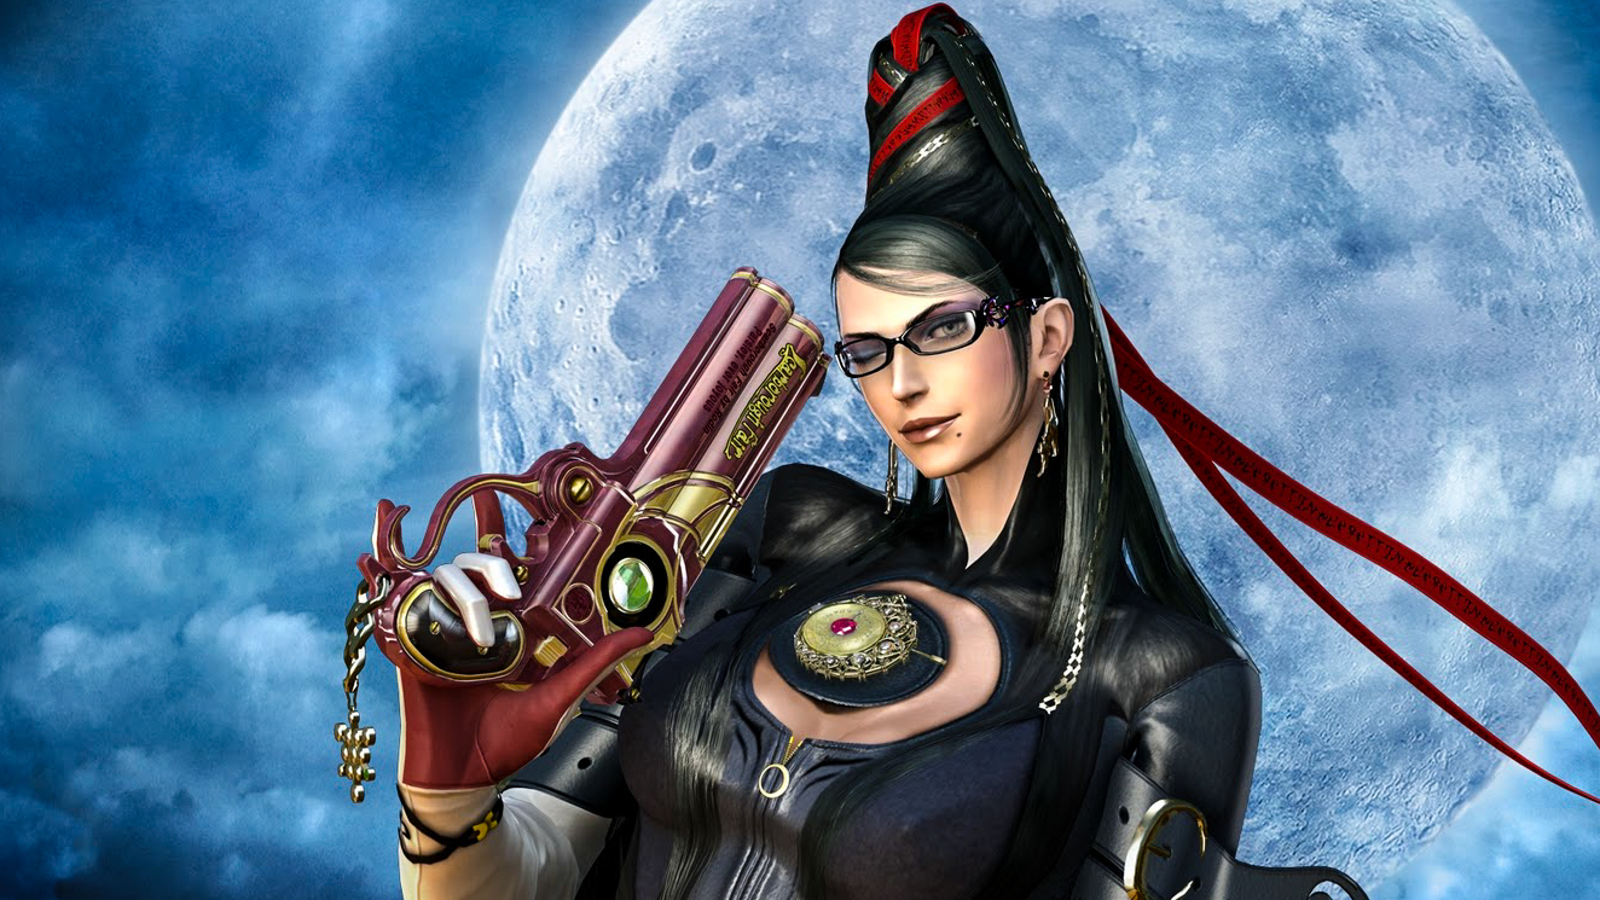 Bayonetta for Switch getting a very nice deluxe edition in Japan